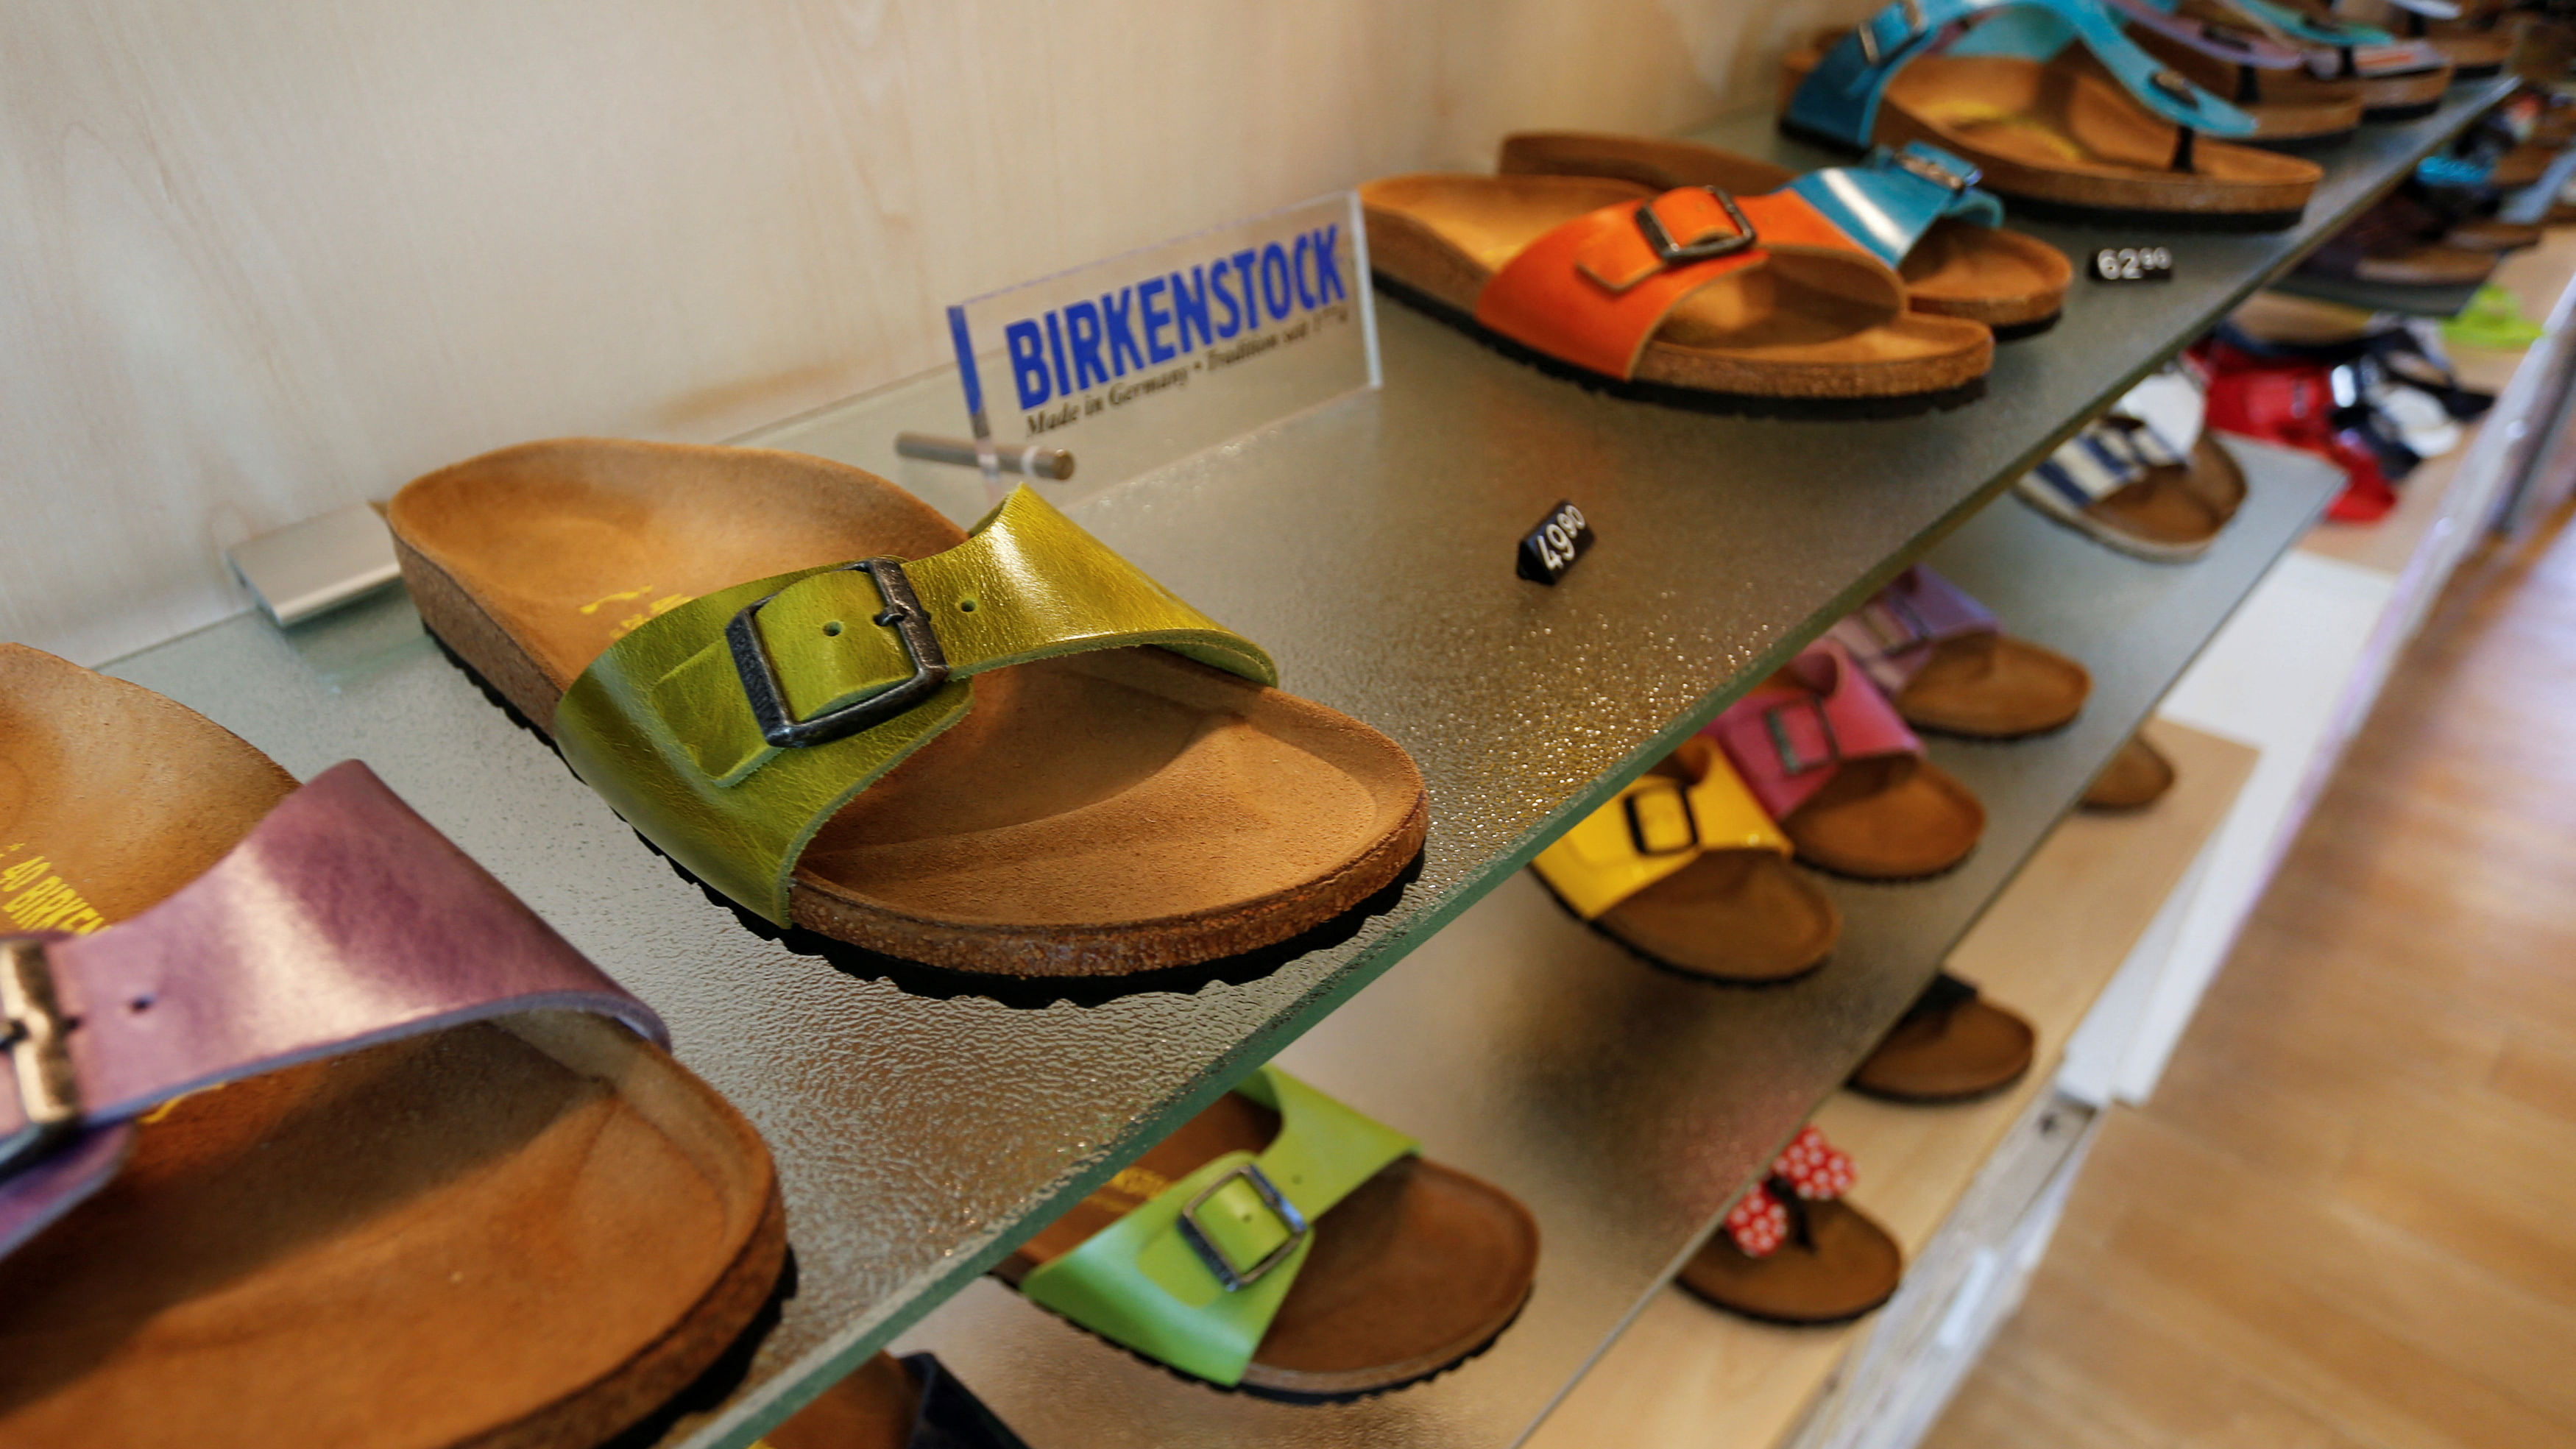 From LSD to I.P.O., Birkenstock Bets Big on Its Global Empire